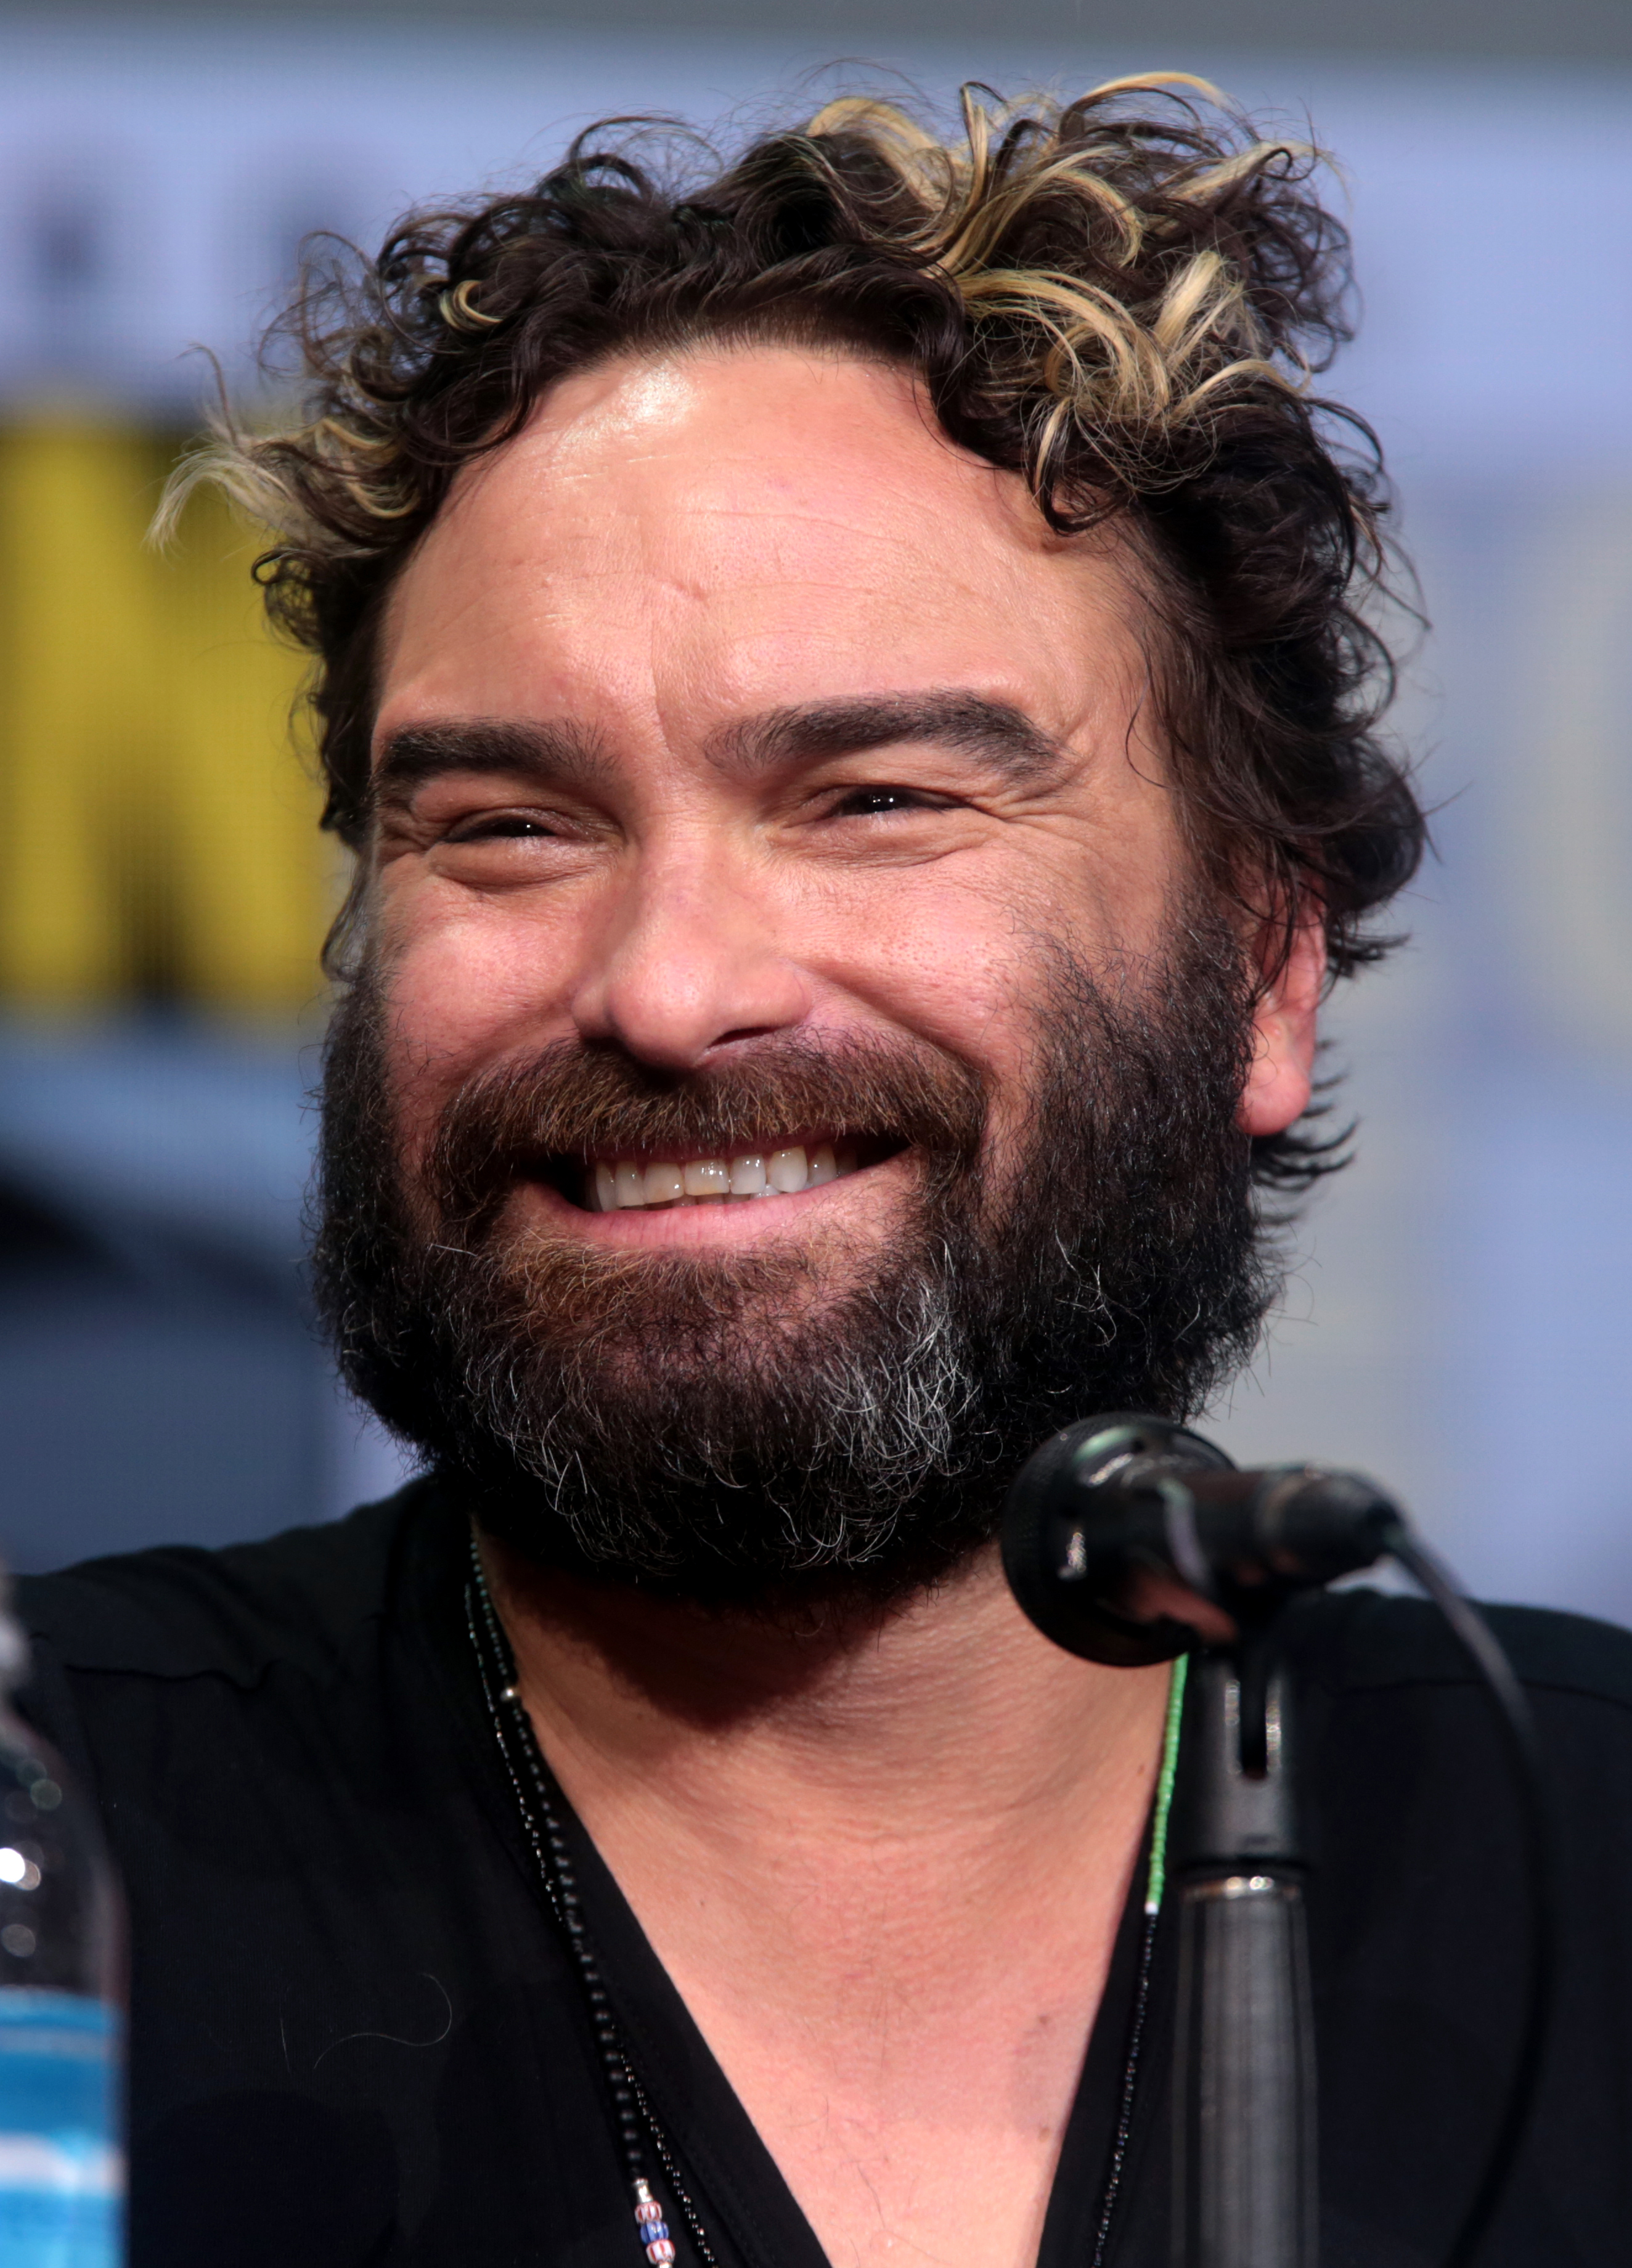 Married who is to galecki johnny Johnny Galecki,